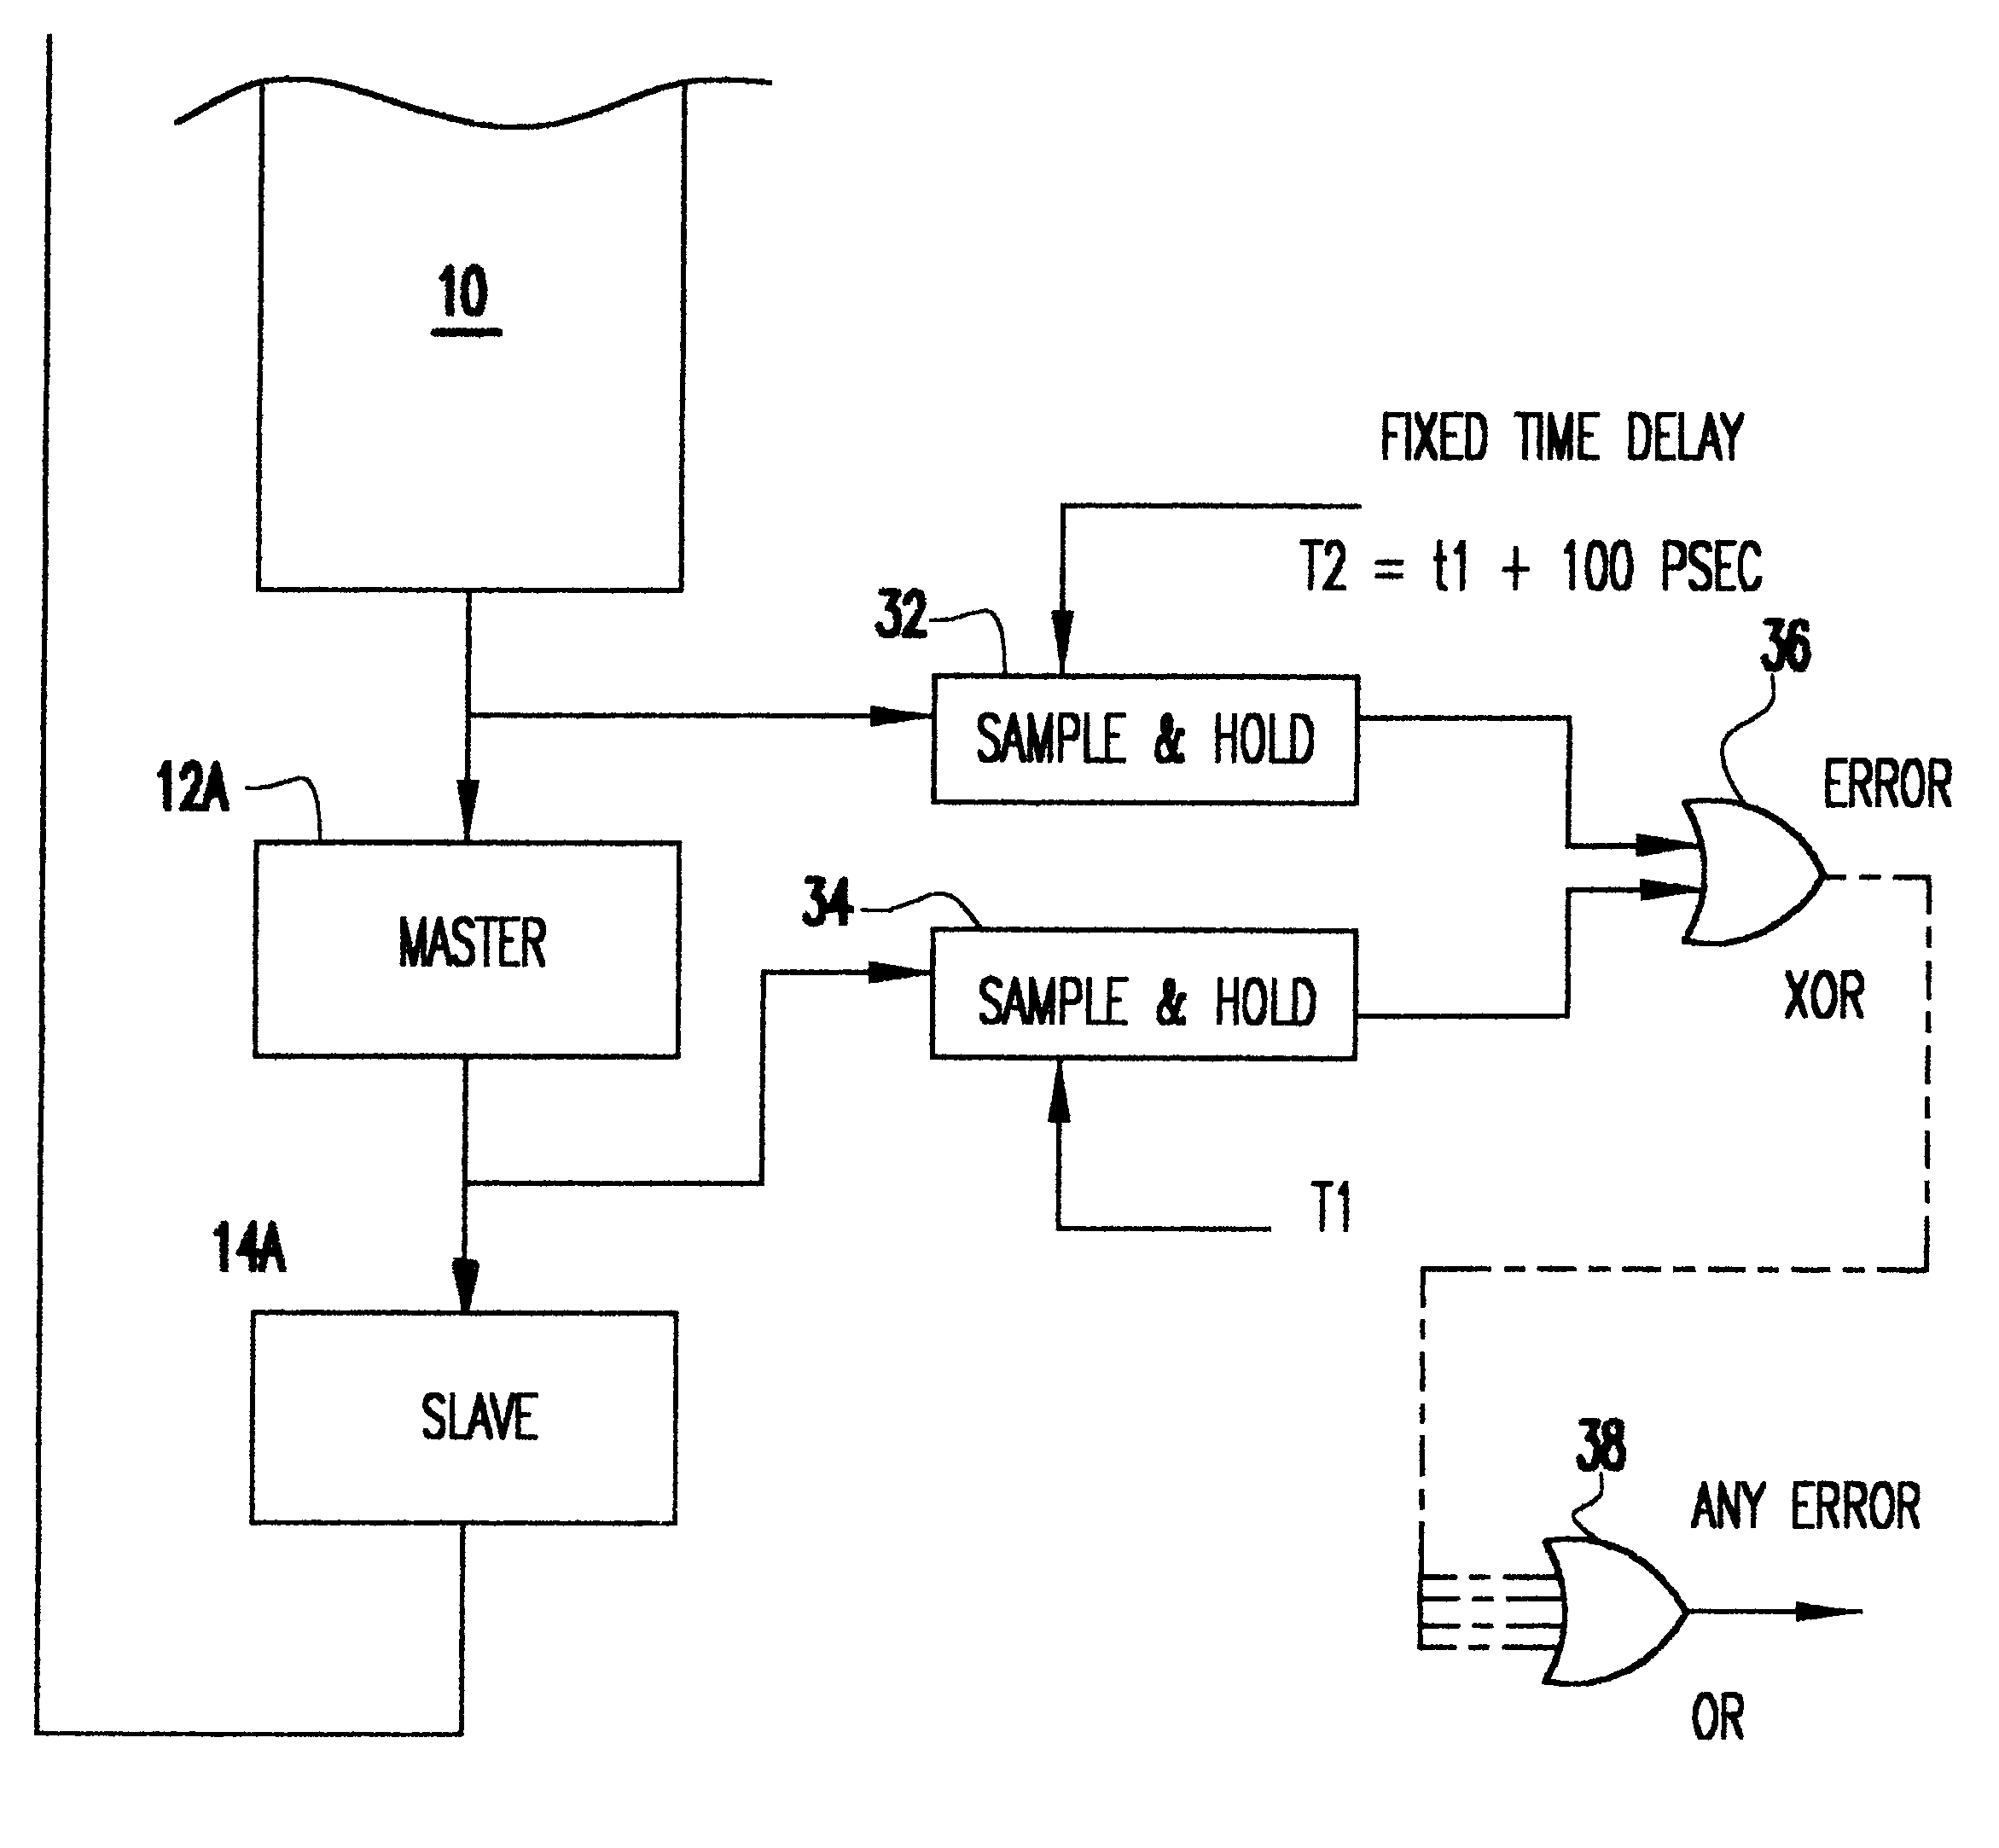 System technique for detecting soft errors in statically coupled CMOS logic